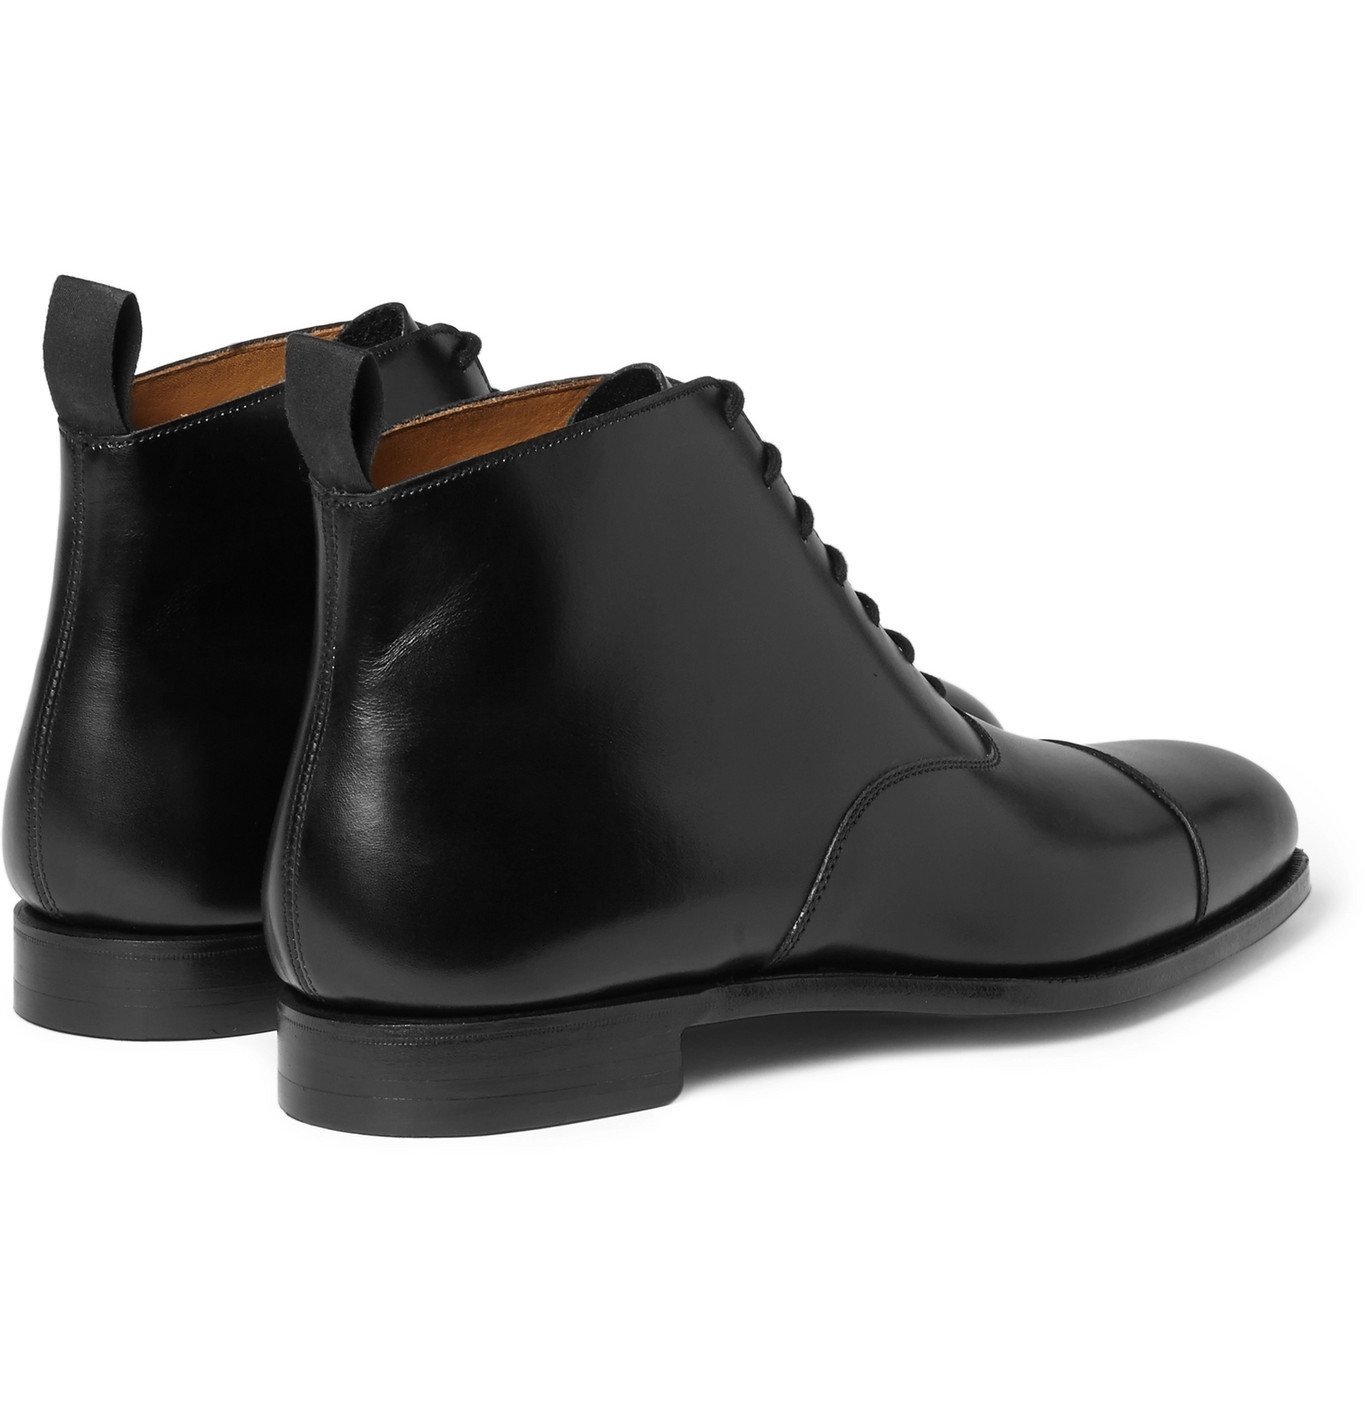 George Cleverley - William Cap-Toe Cotswold Grain Leather Boots - Black ...